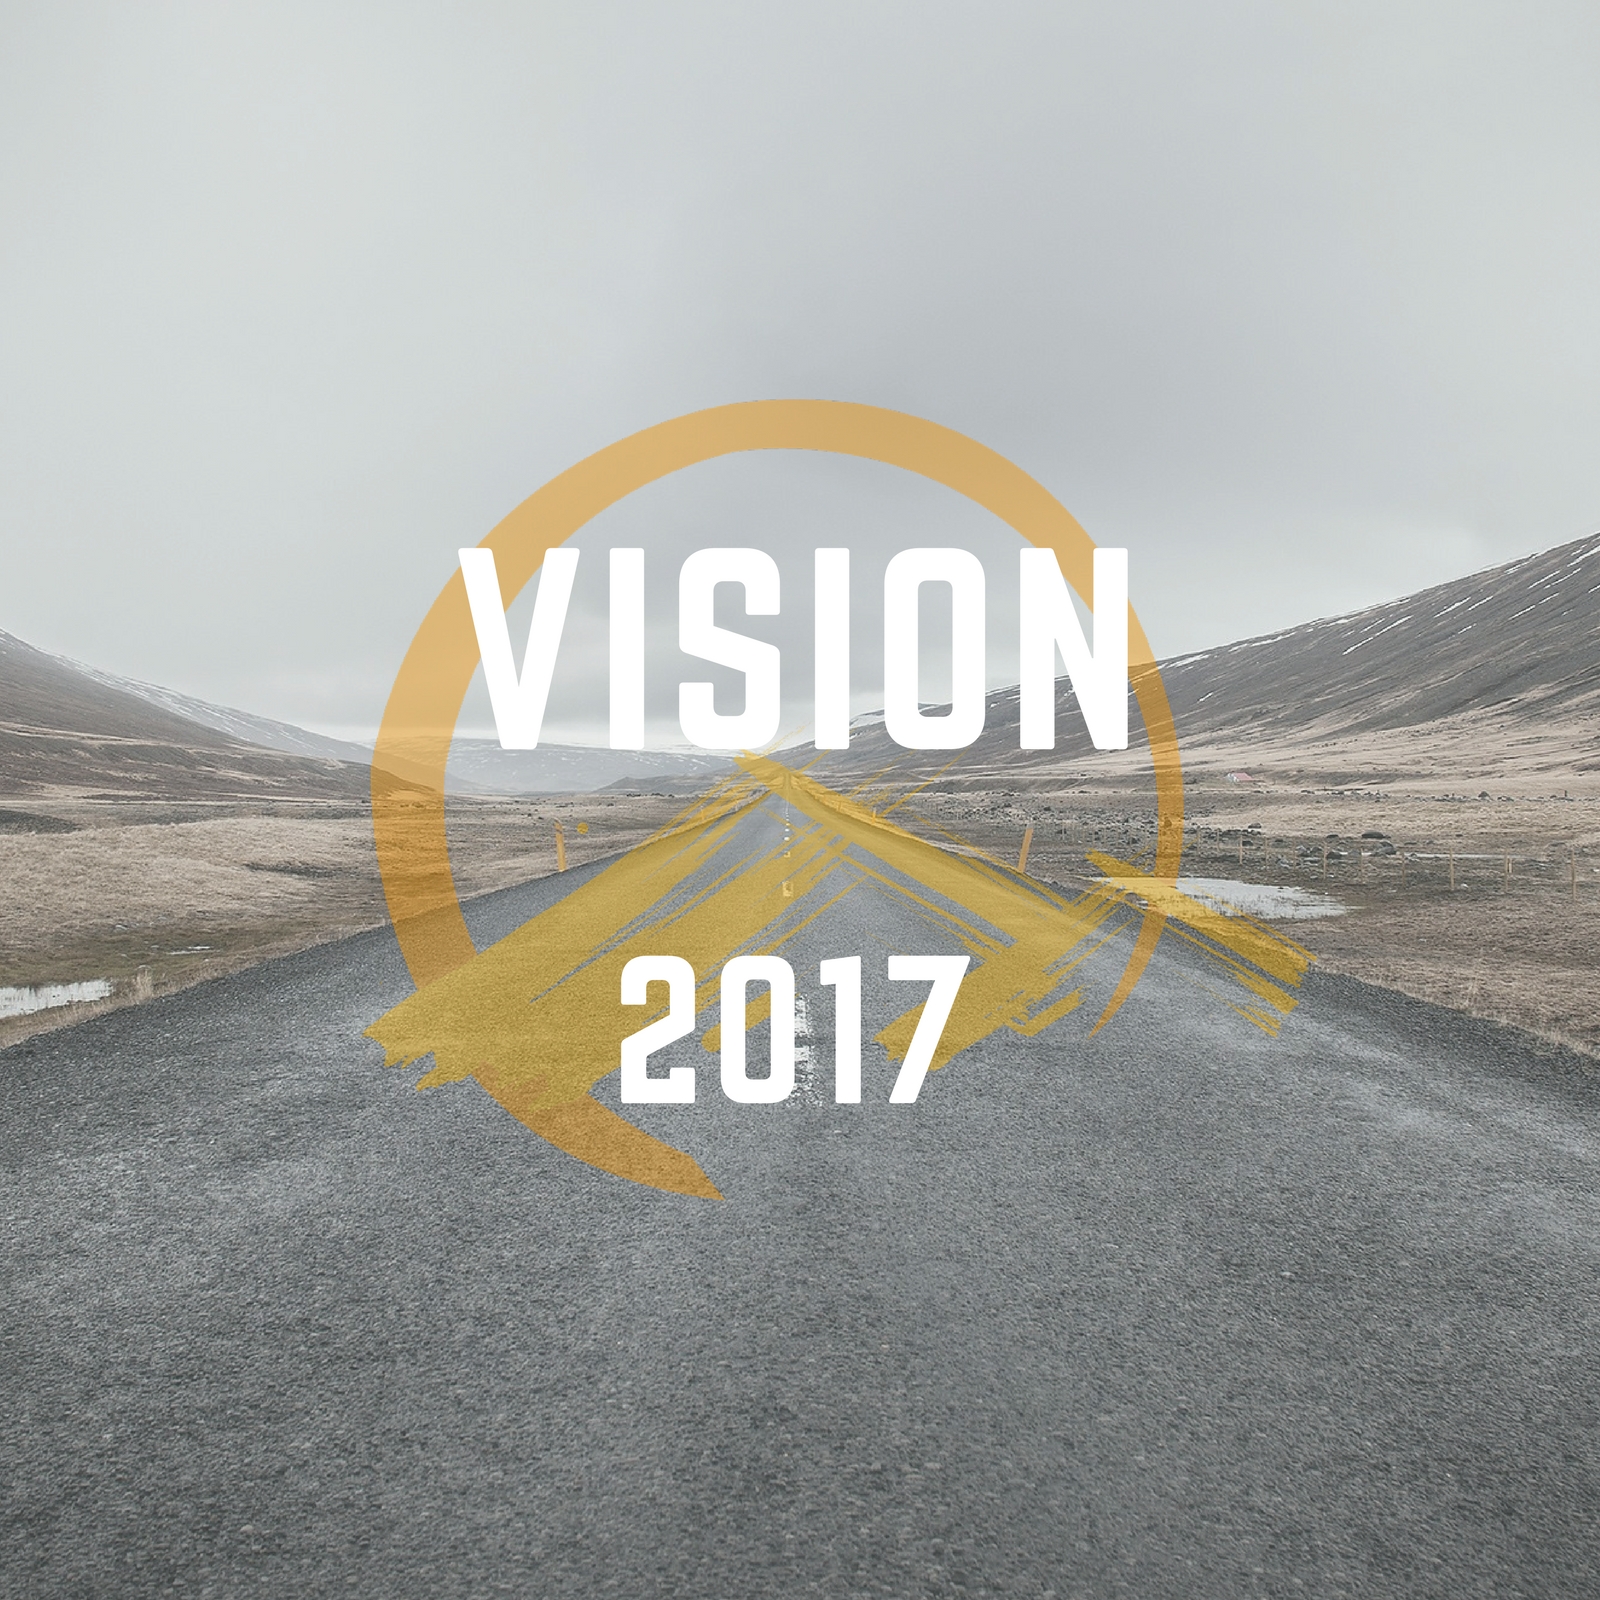 Provision for Vision